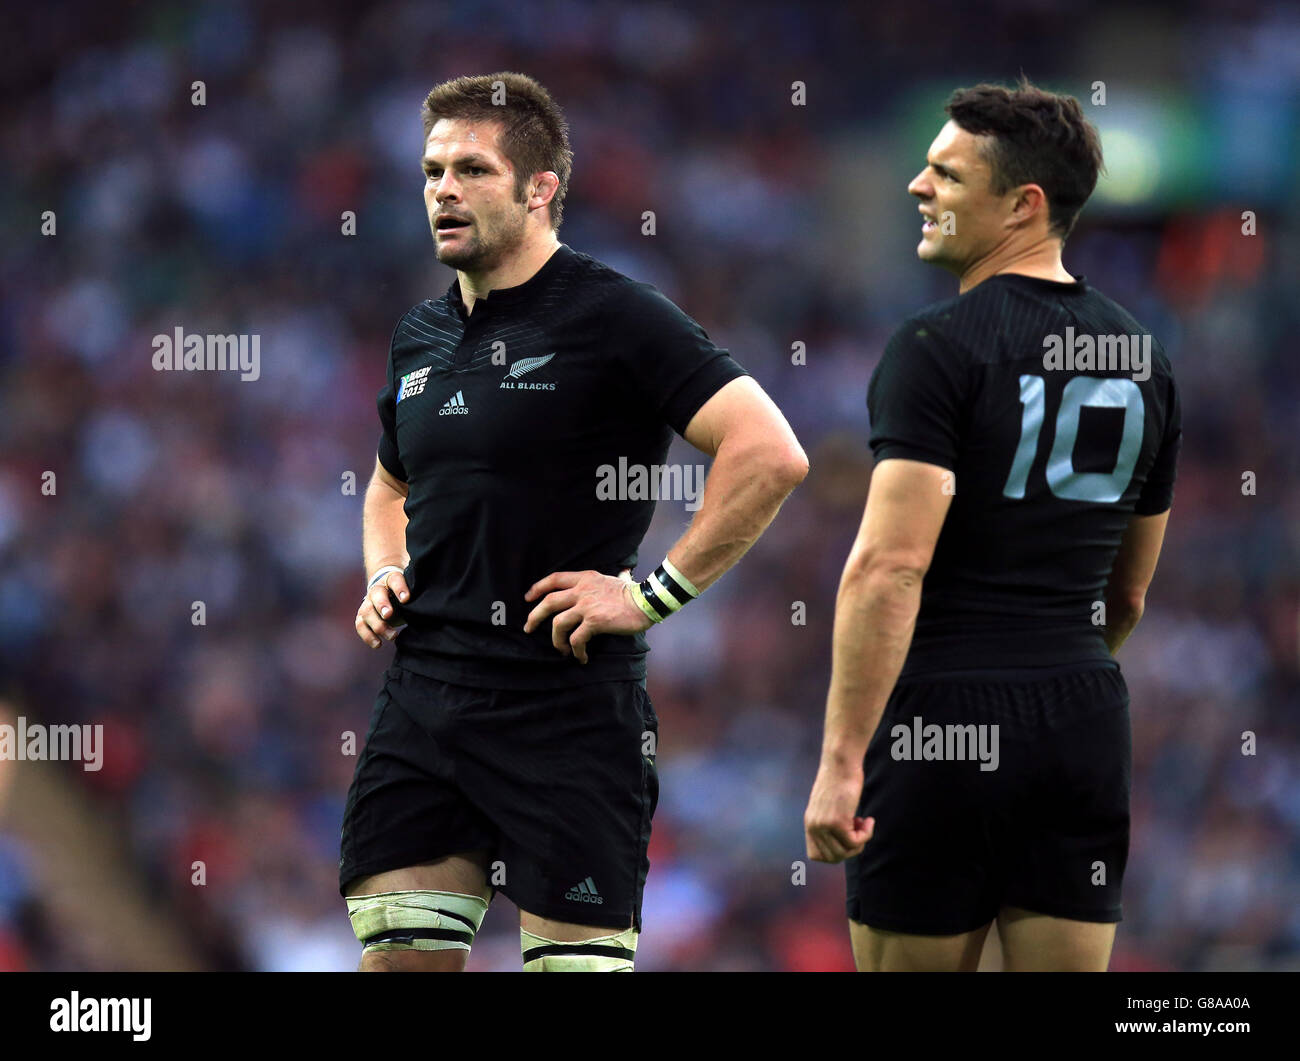 Rugby Union - Rugby World Cup 2015 - Pool C - New Zealand v Argentina - Wembley Stadium. New Zealand's Richie McCaw (left) and Dan Carter during the Rugby World Cup match at Wembley Stadium, London. Stock Photo